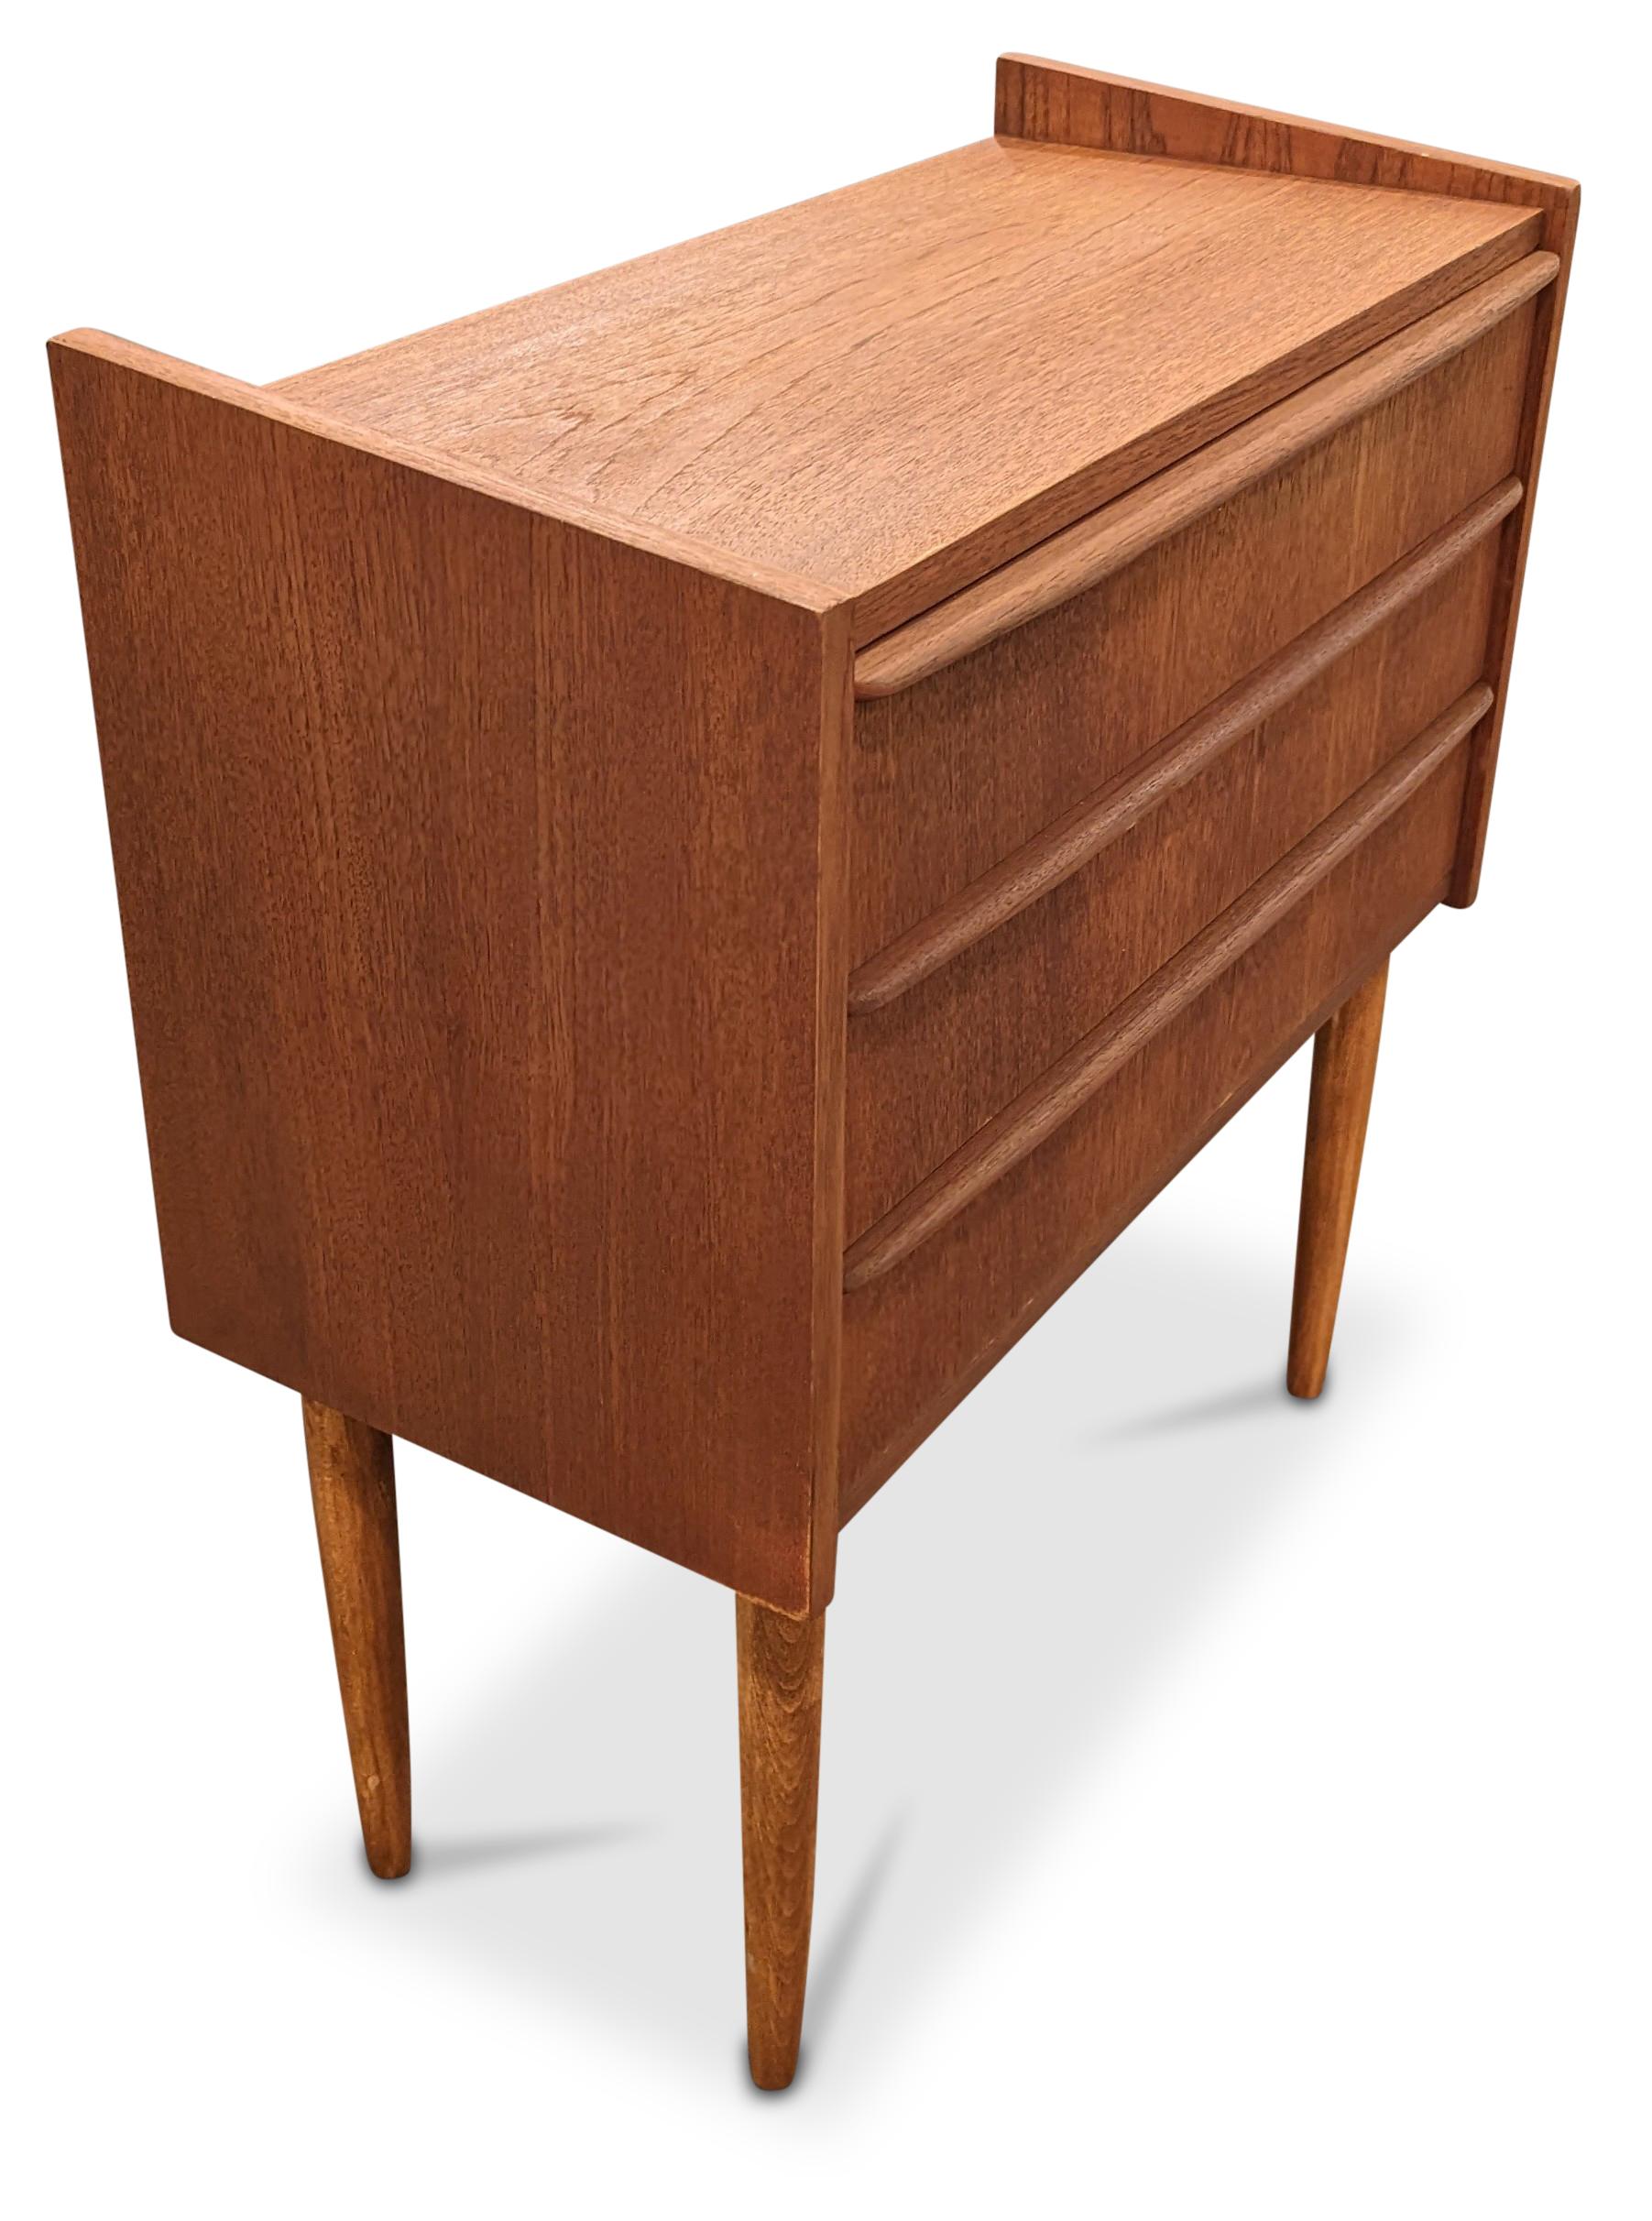 Vintage Danish Mid-Century Modern, made in the 1950's - Recently refurbished

These pieces are more than 65+ years old and some wear and tear can be expected, but we do everything we can to refurbish them in respect to the design.

There is a